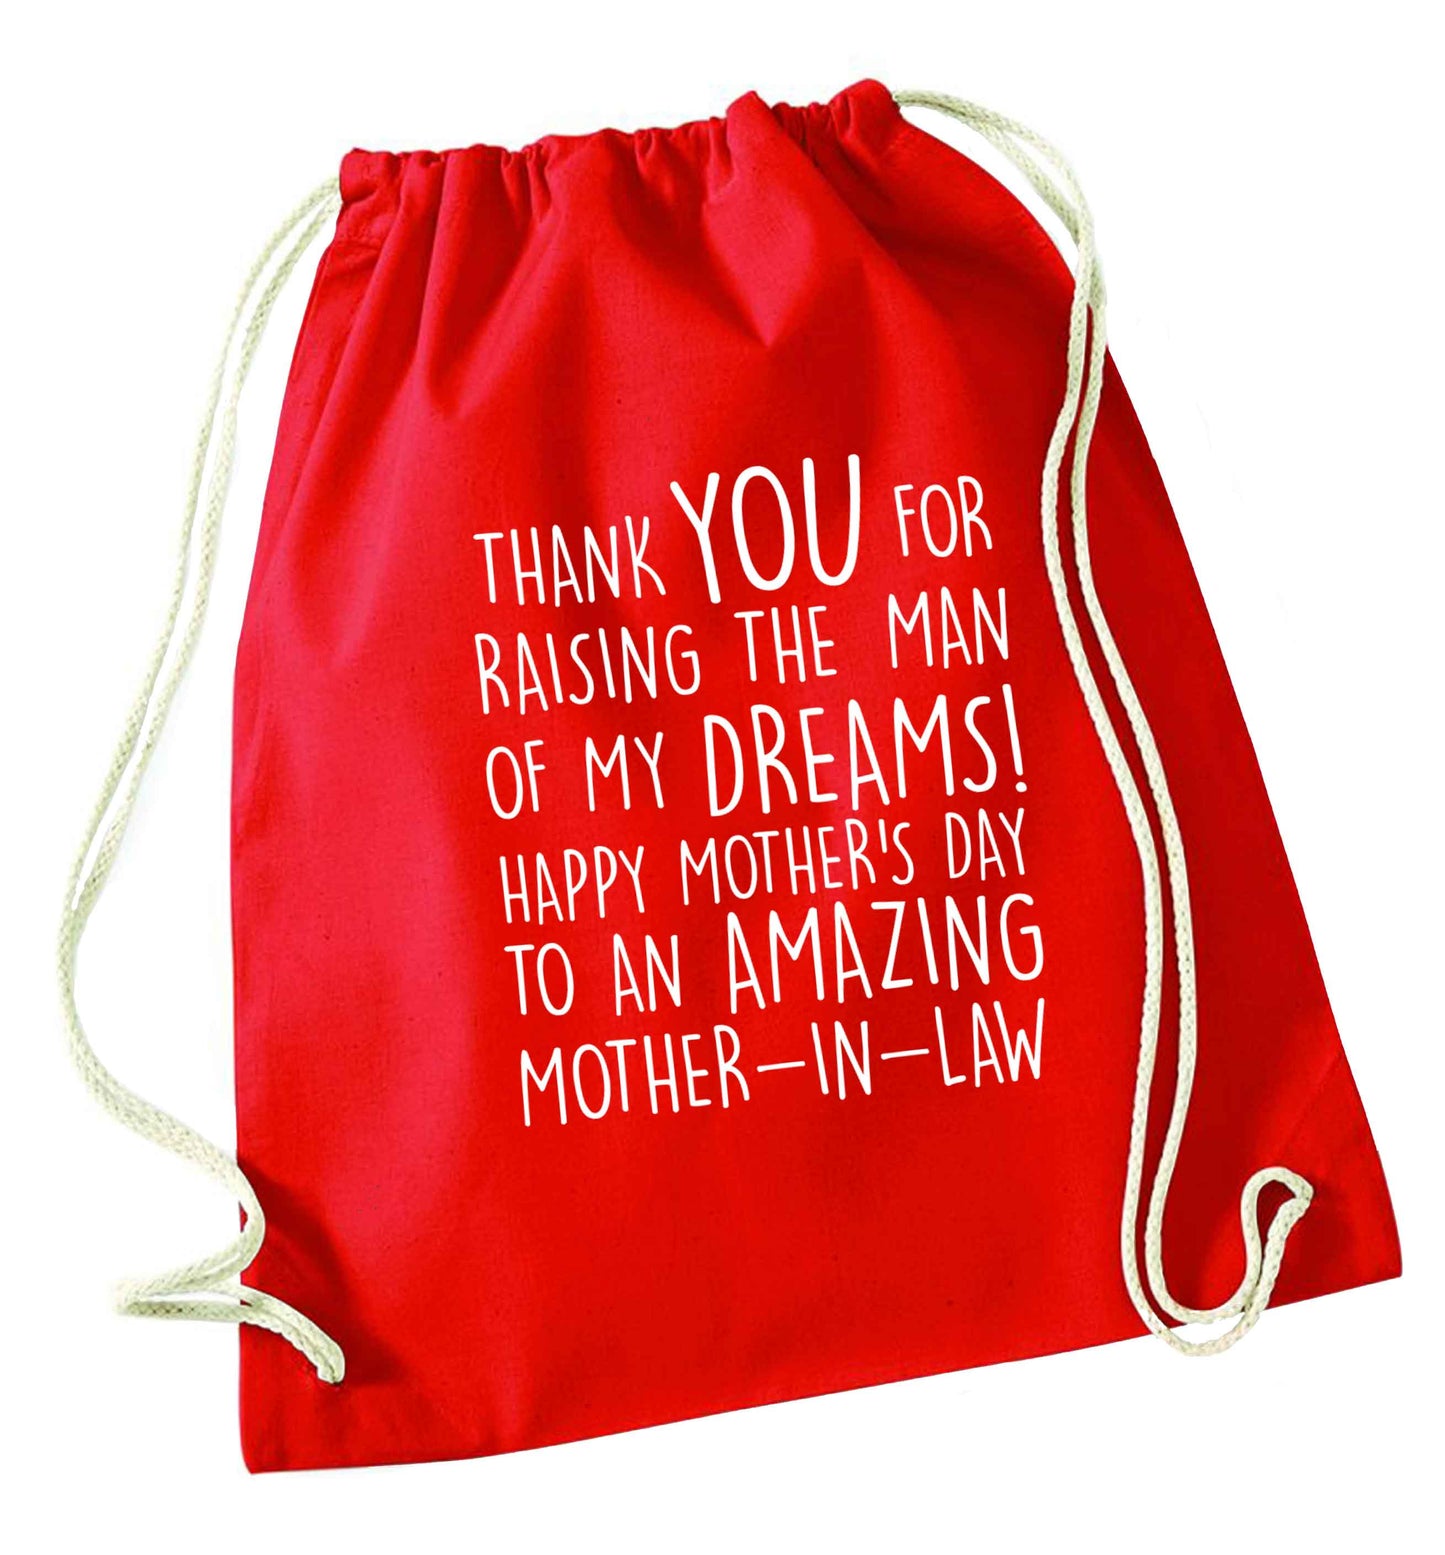 Raising the man of my dreams mother's day mother-in-law red drawstring bag 